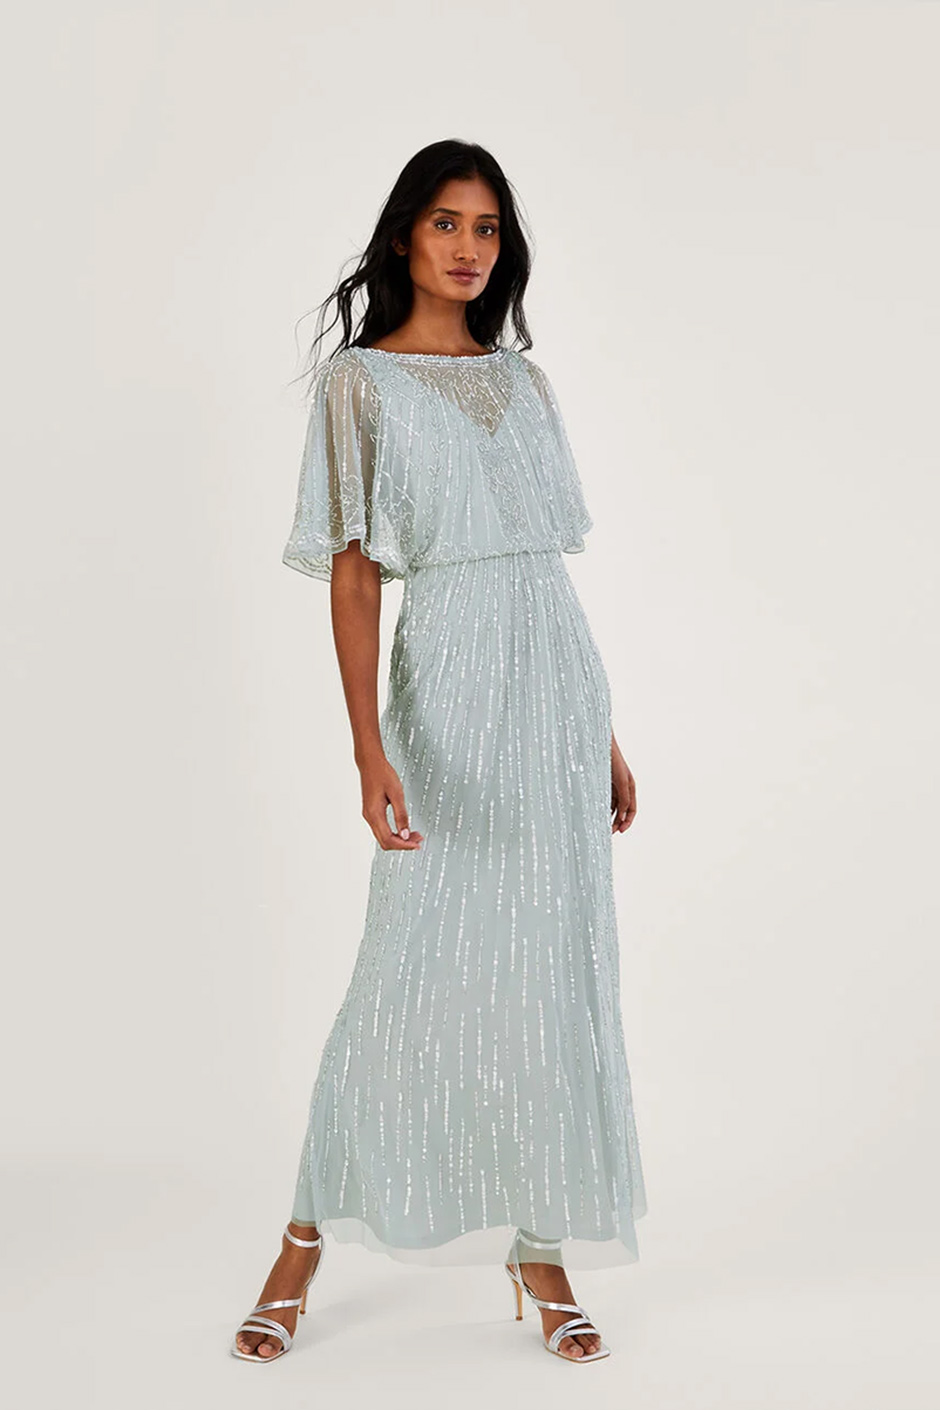 monsoon-maxi-dress-with-embellished-detail.jpg